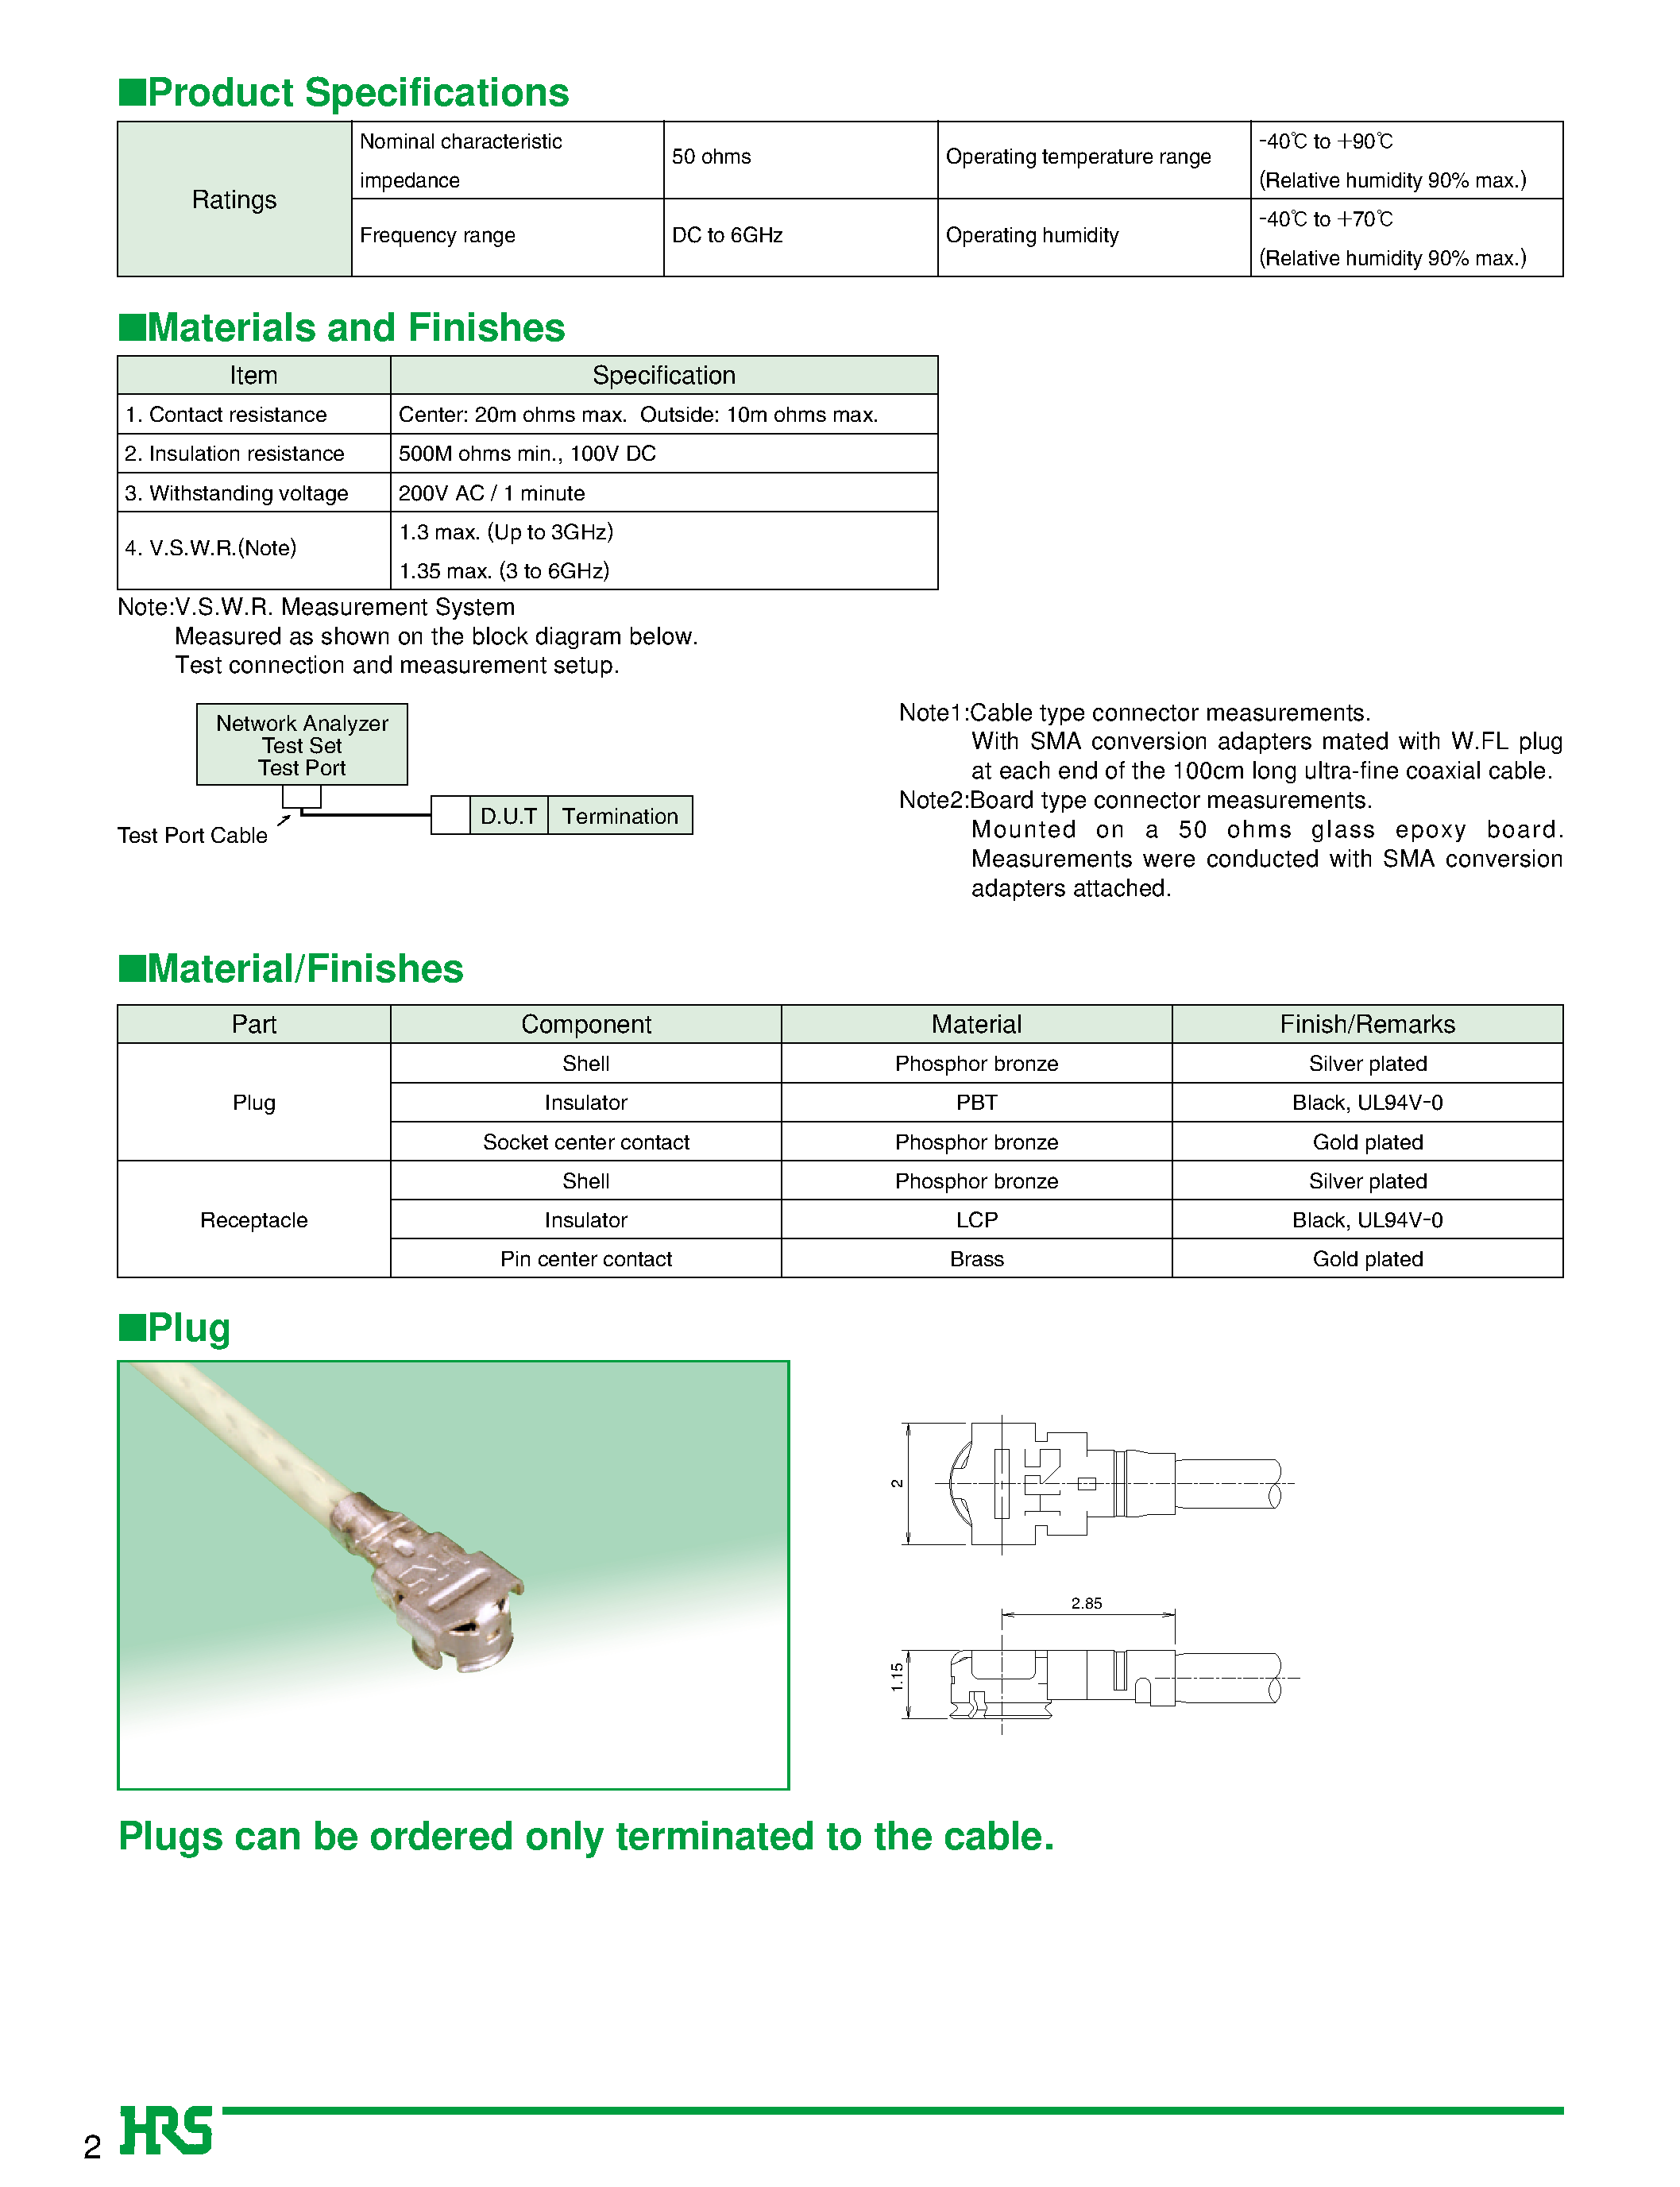 Datasheet HRMJ-W.FLP - Ultra Small Surface Mount Coaxial Connectors - 1.4mm Mated Height page 2